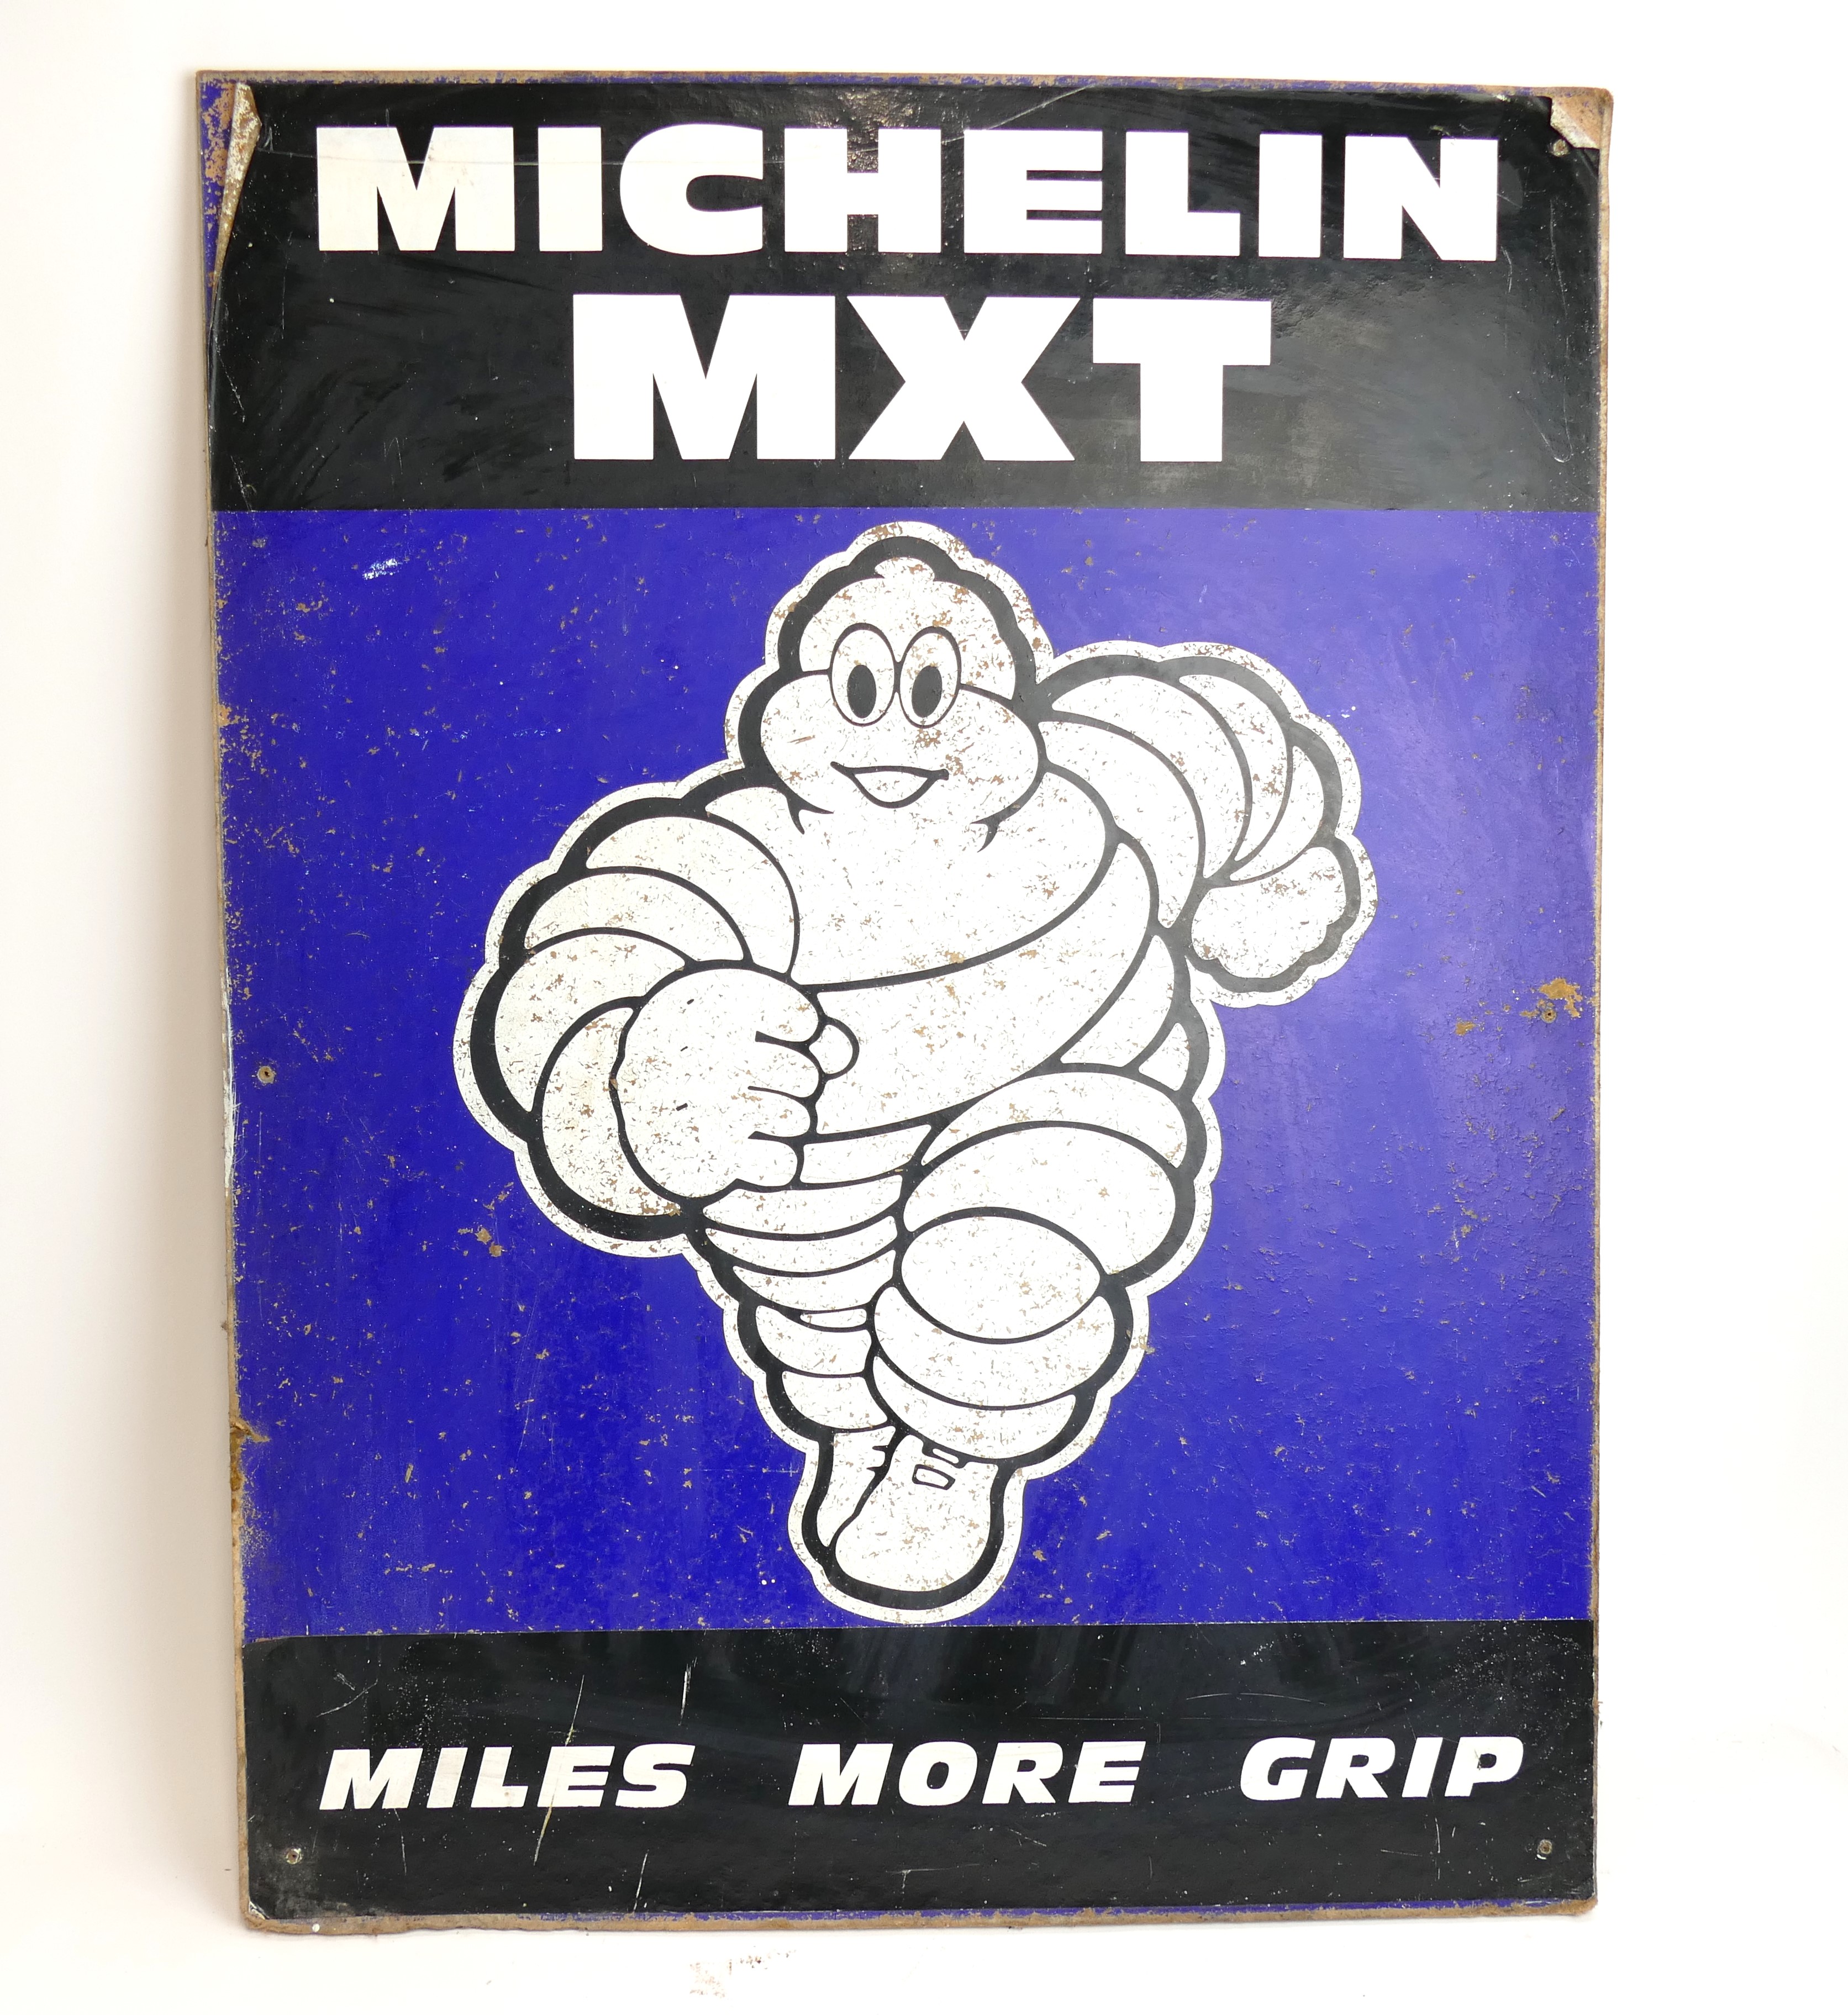 Michelin MXT Tyres 'Miles More Grip' adv